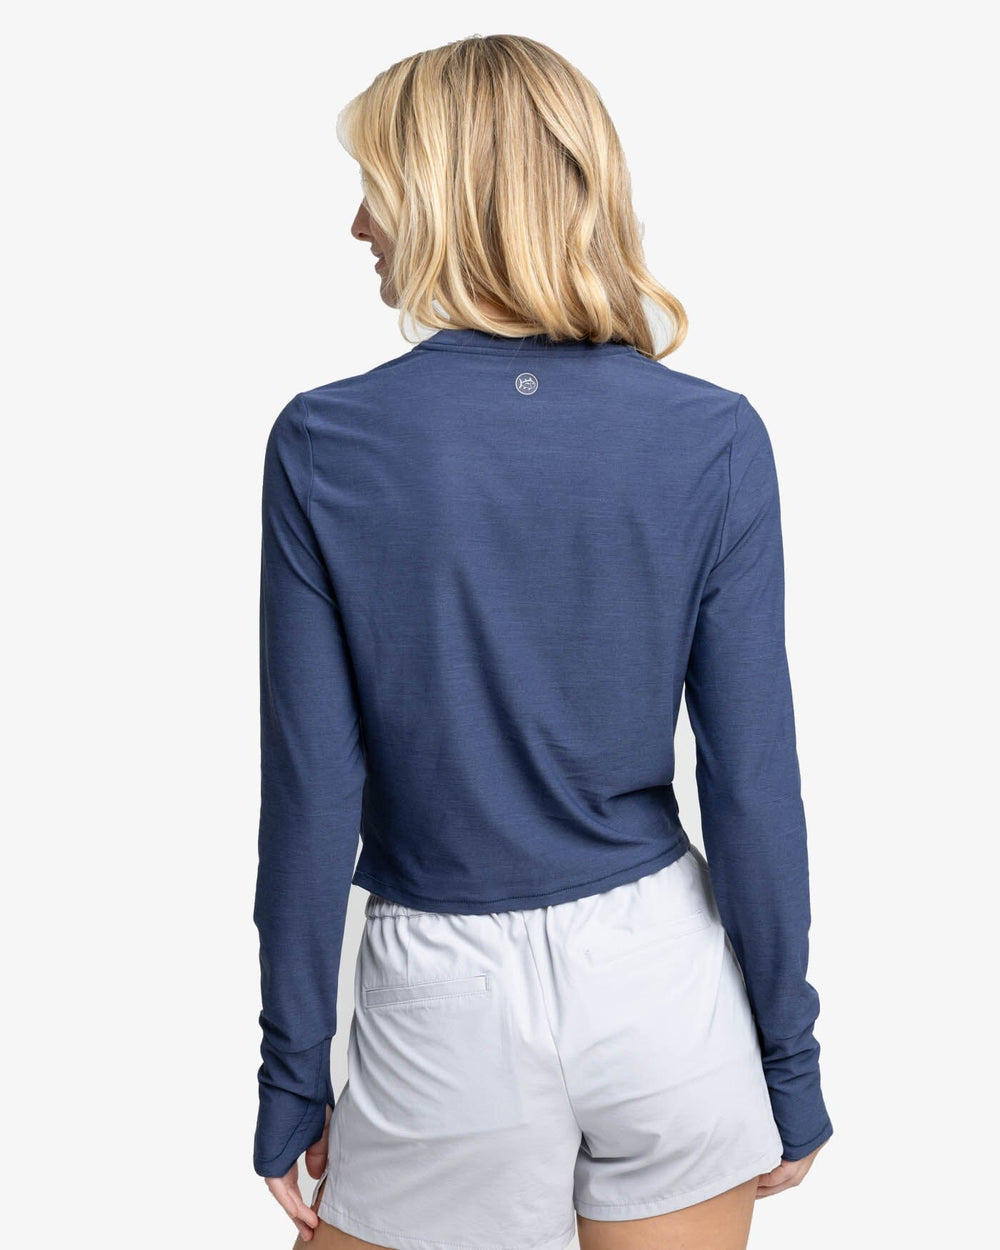 The back view of the Southern Tide Margot brrr°-illiant Twist Knot Top by Southern Tide - Nautical Navy